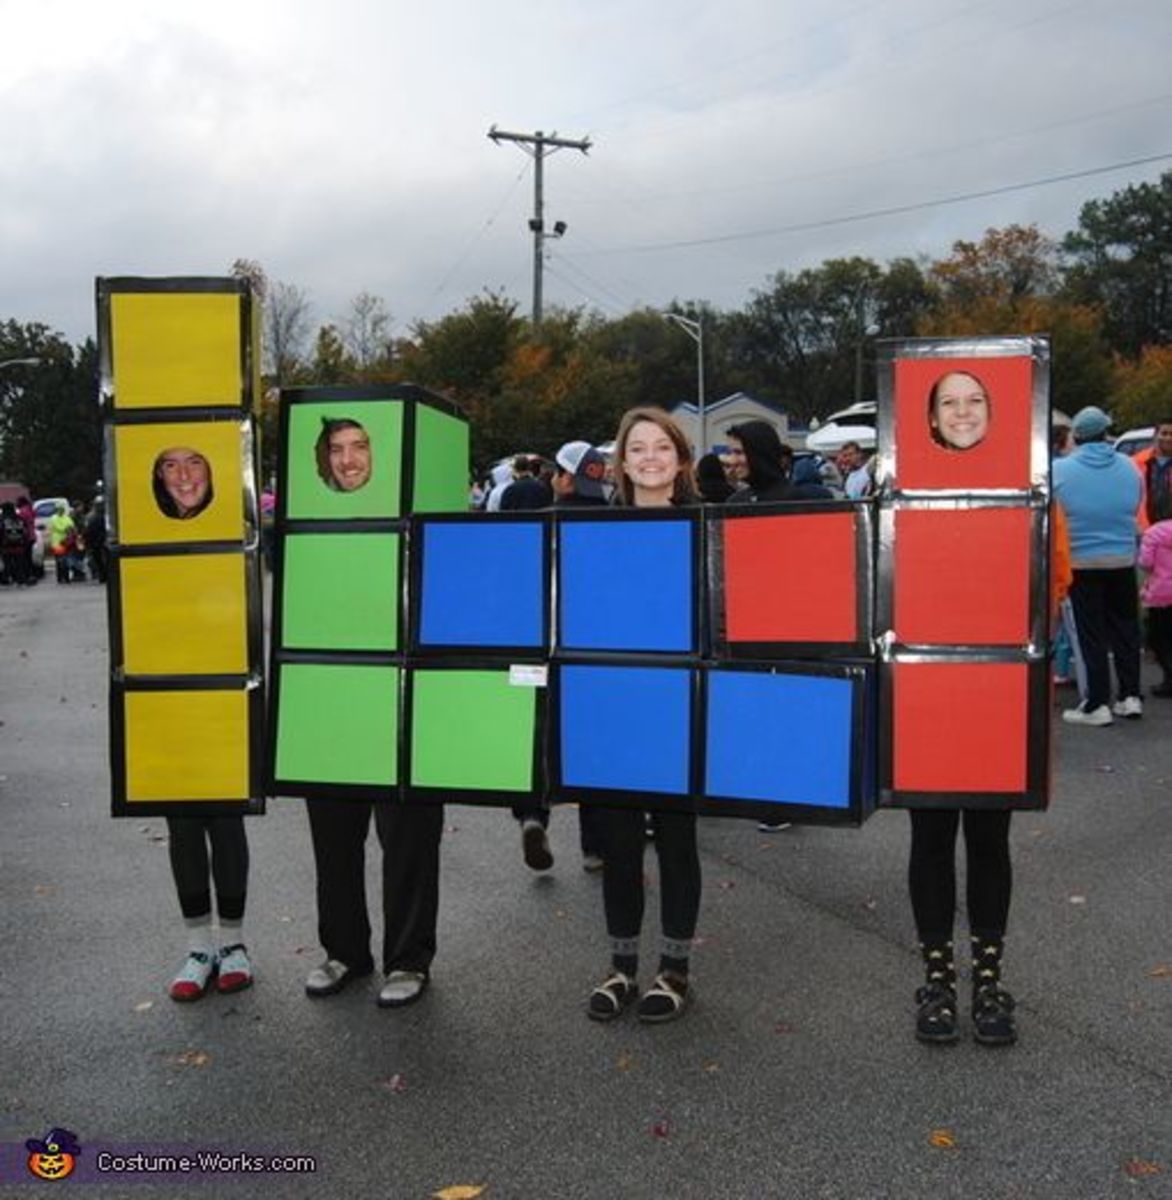 10-halloween-costume-ideas-on-a-low-budget